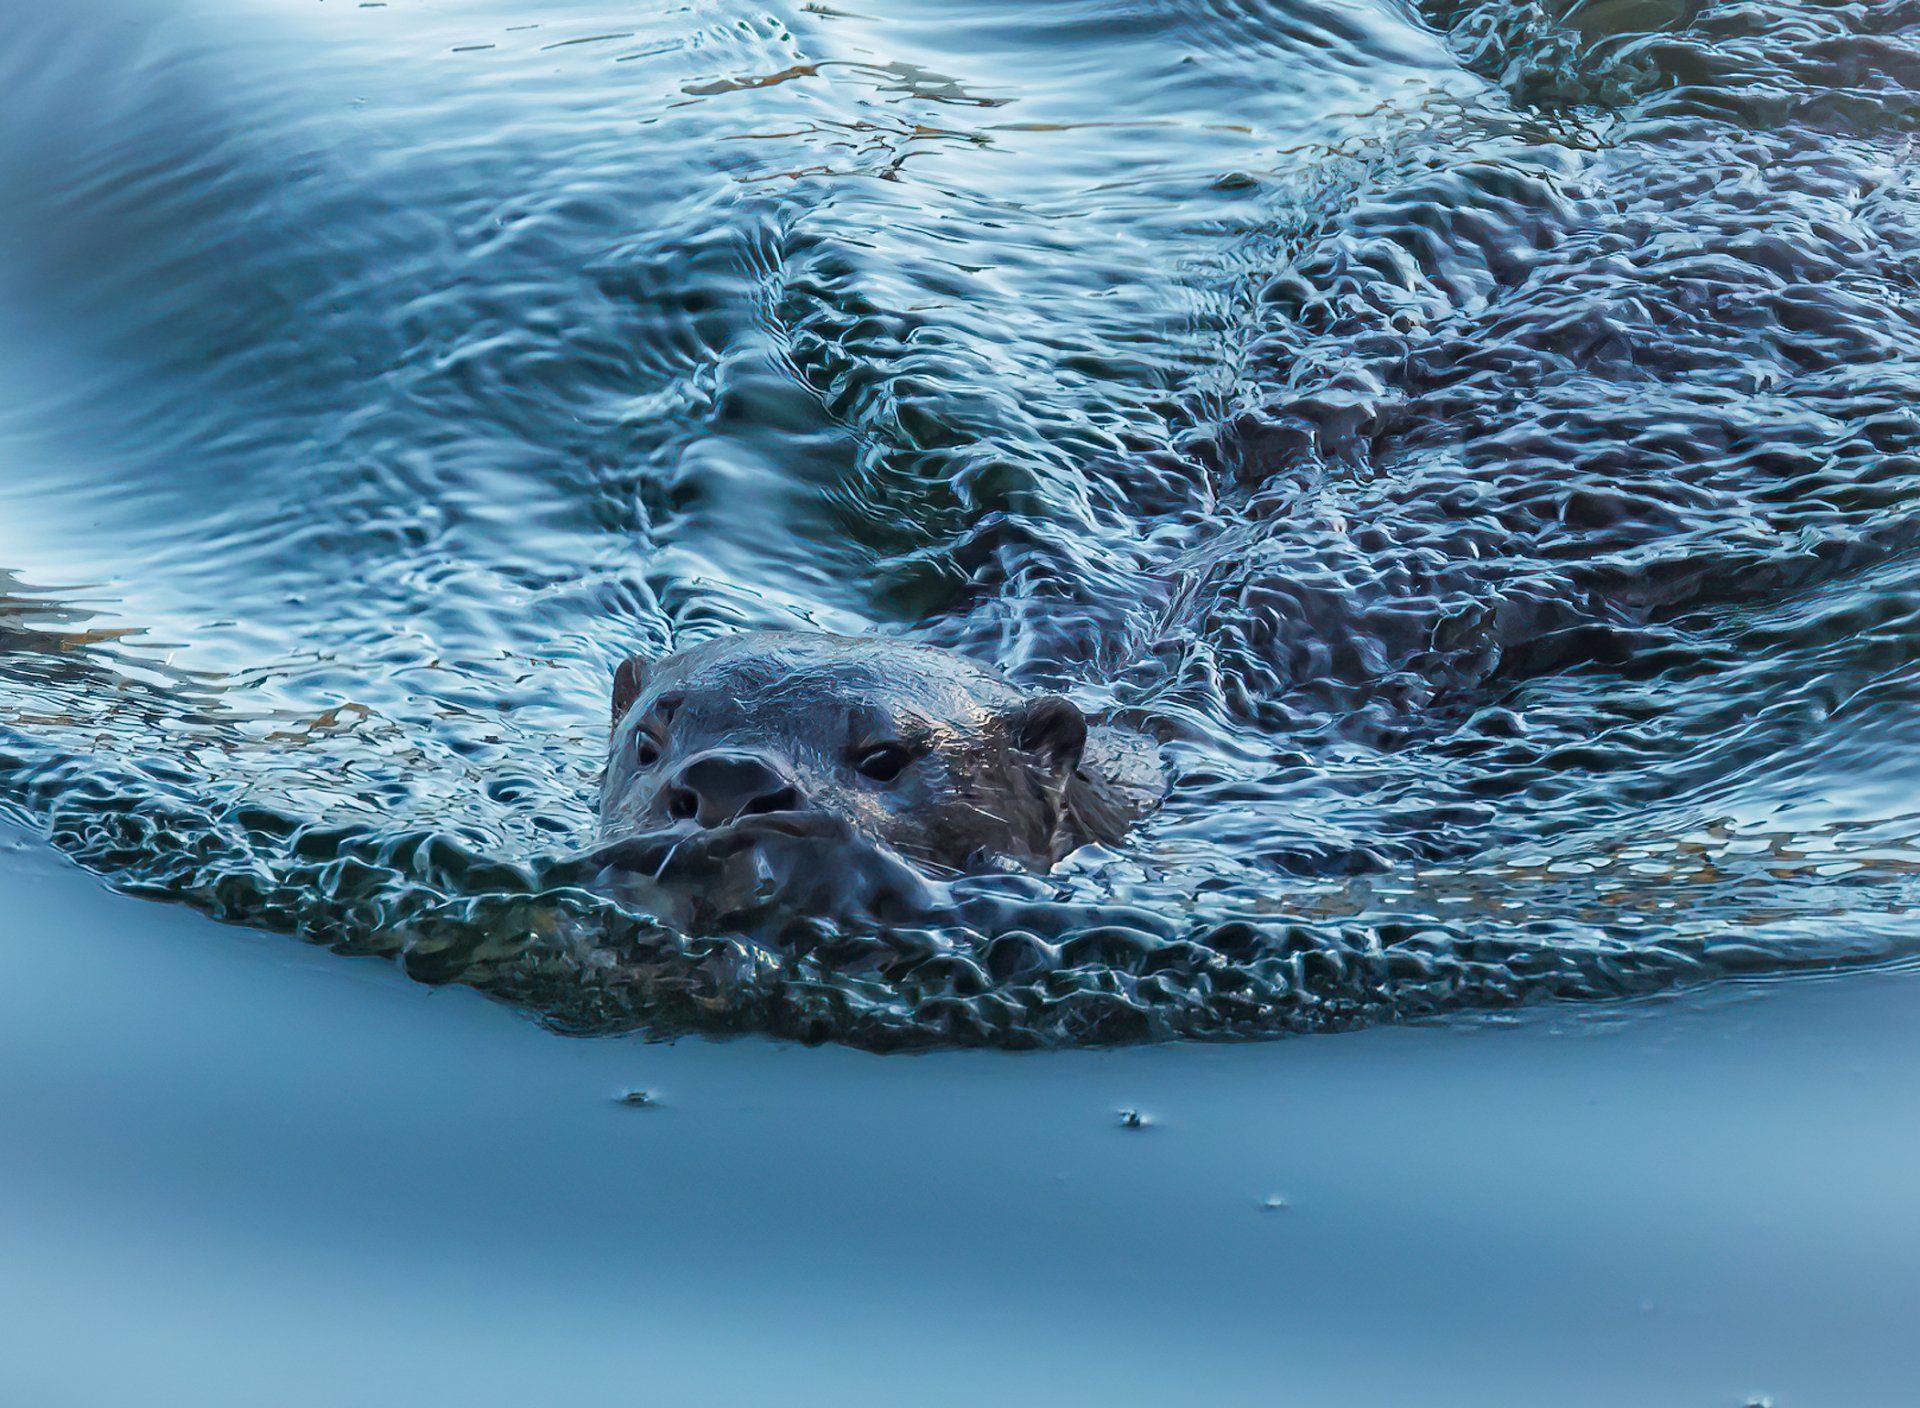 River otter surfaces while hunting crayfish.